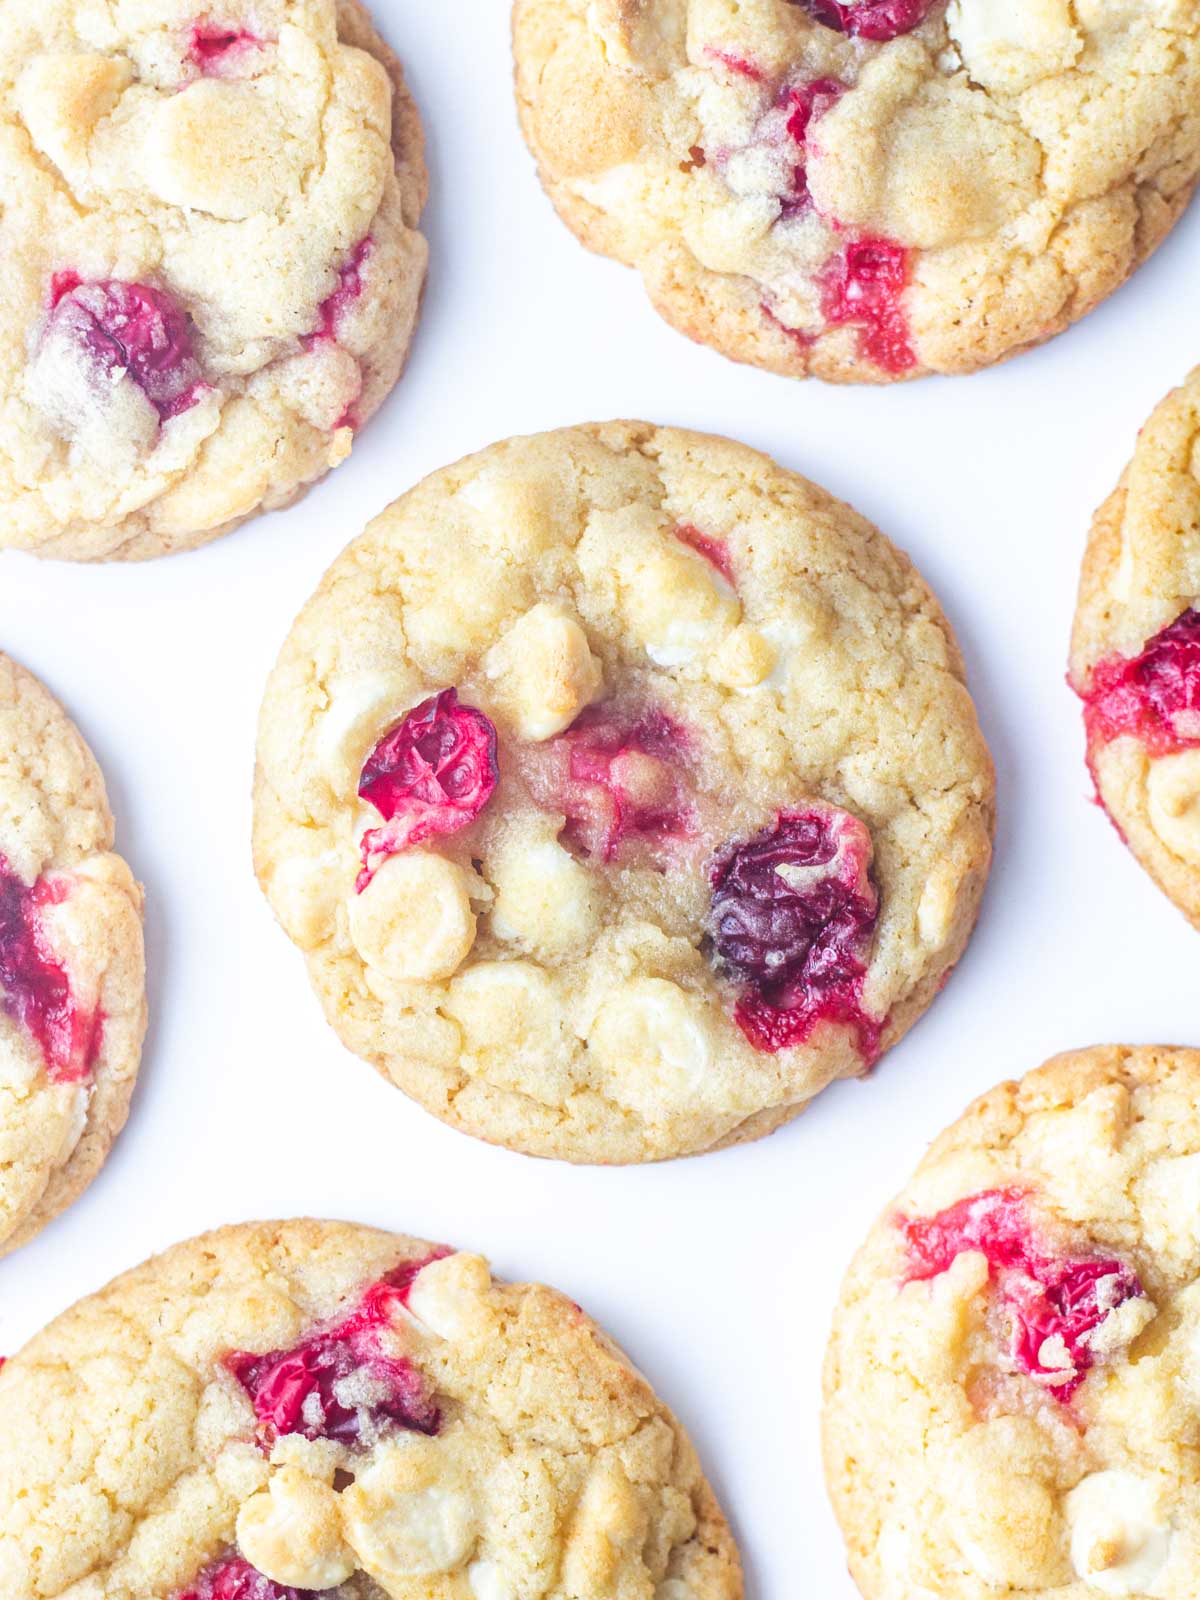 Top down view of cranberry white chocolate cookies on a white surface.